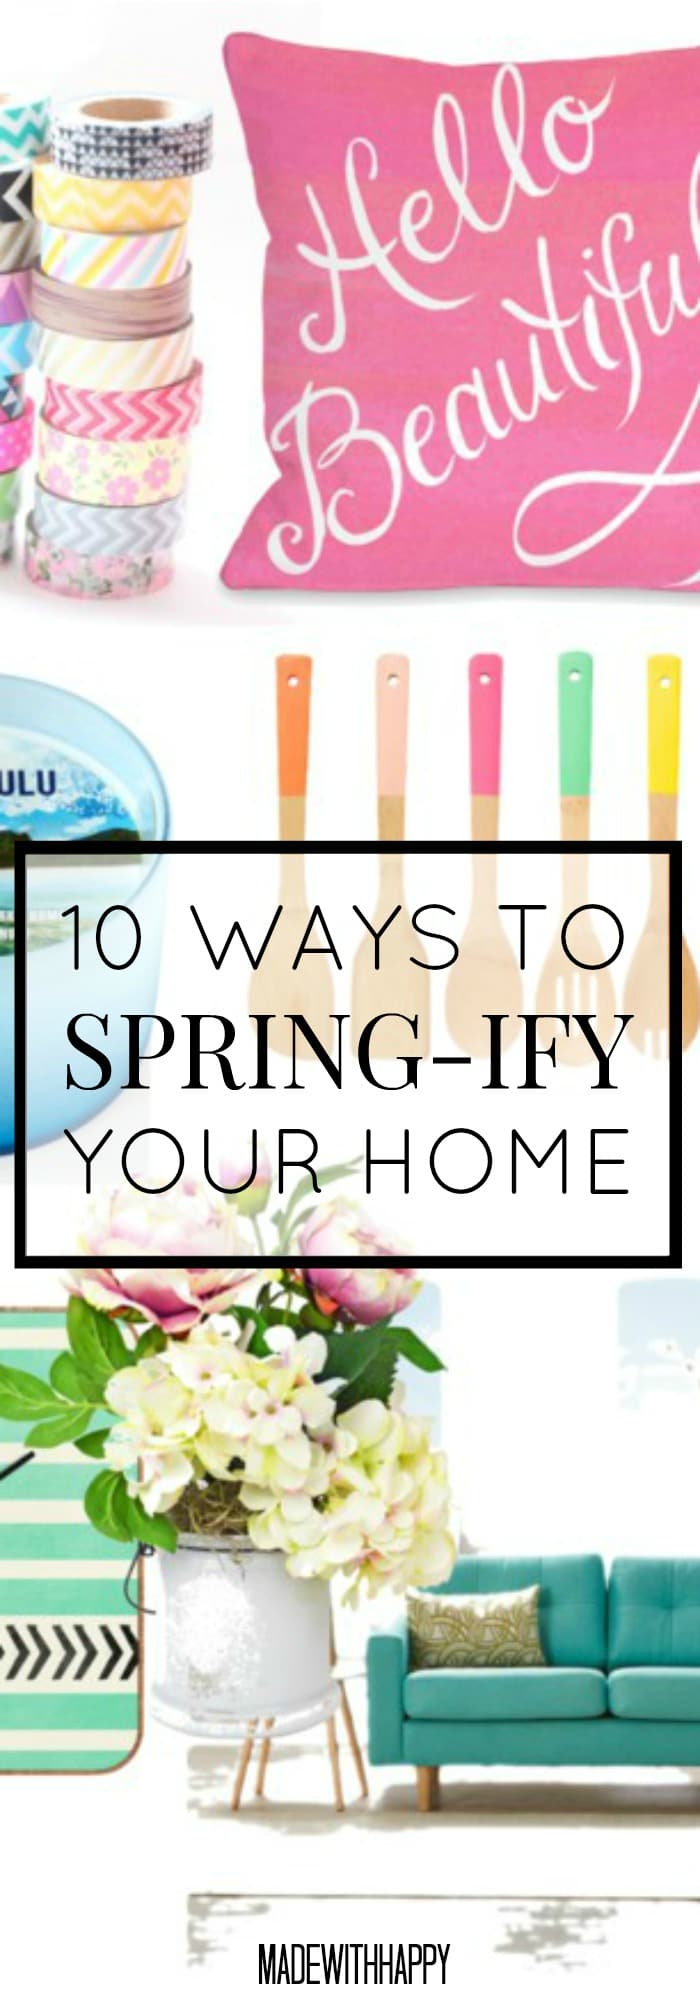 10 Ways to Update your Home for Spring | Spring-ify your home | Spring Updates | www.madewithHAPPY.com